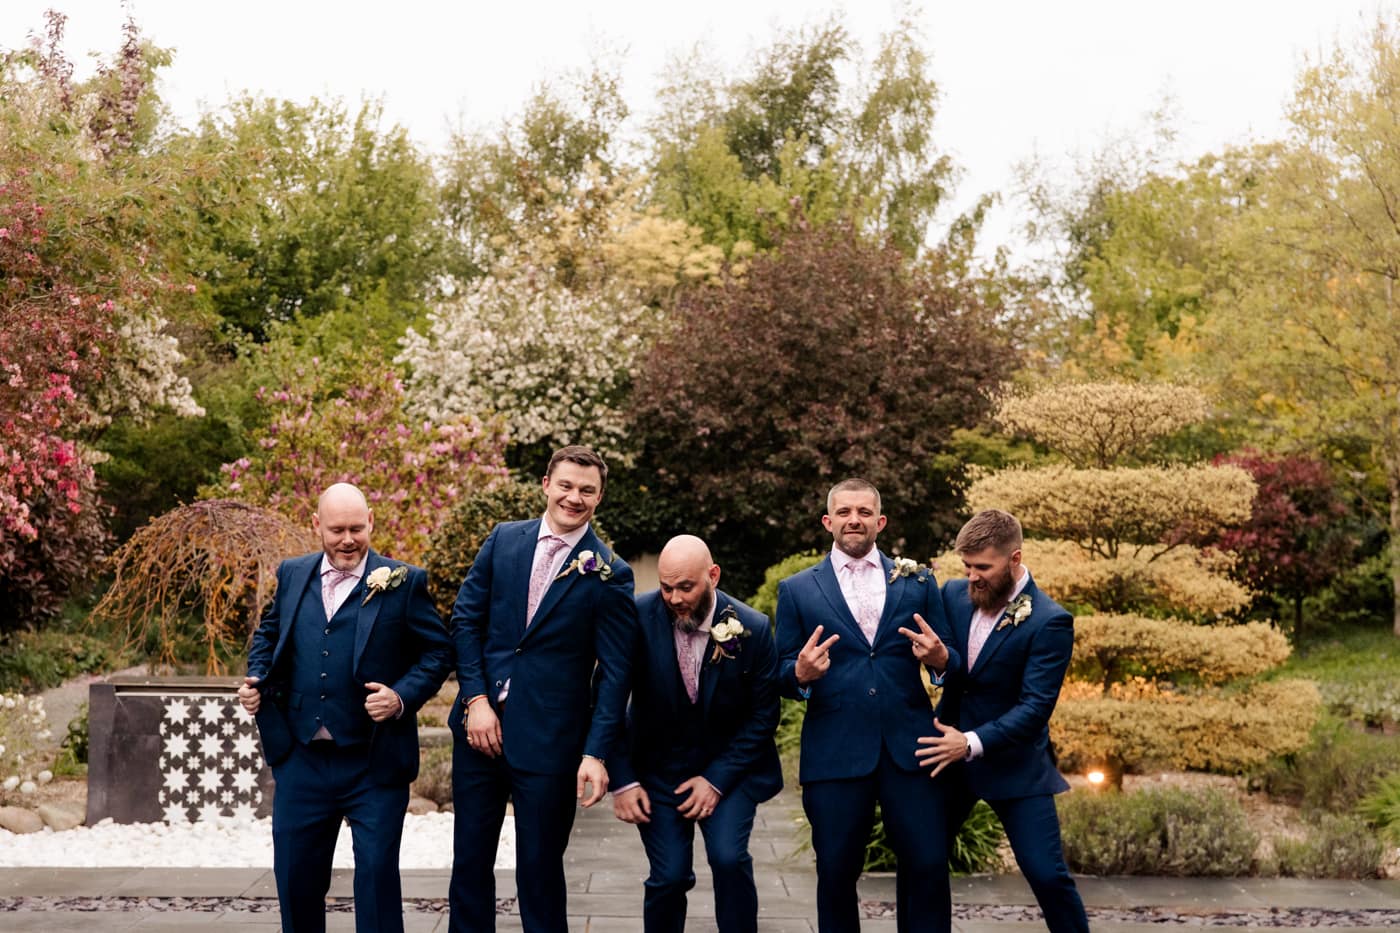 group photos in the gardens at styal lodge wedding barn in cheshire